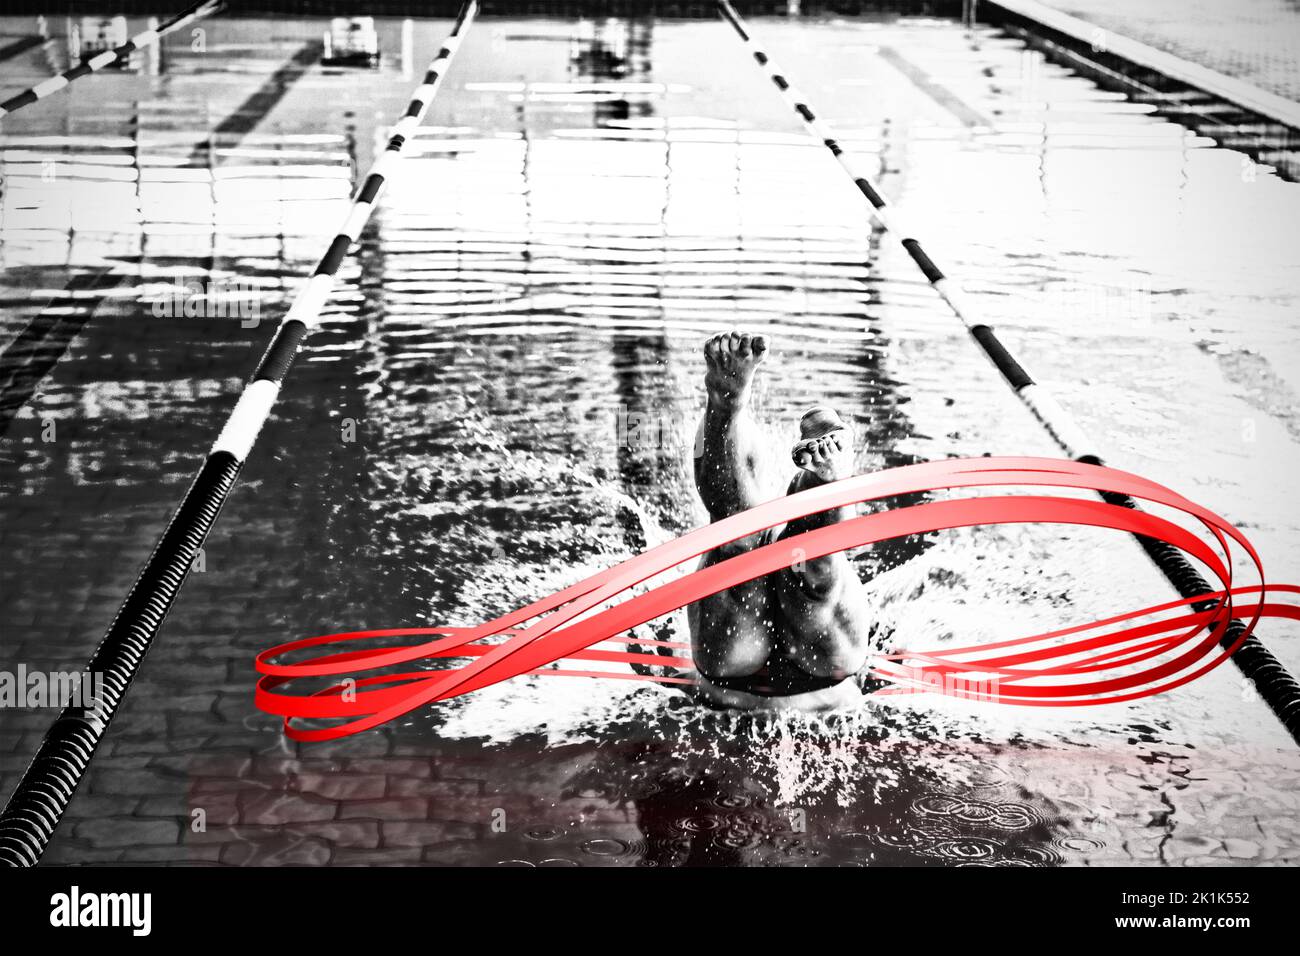 Grey line design against swimmer plunging in the pool Stock Photo